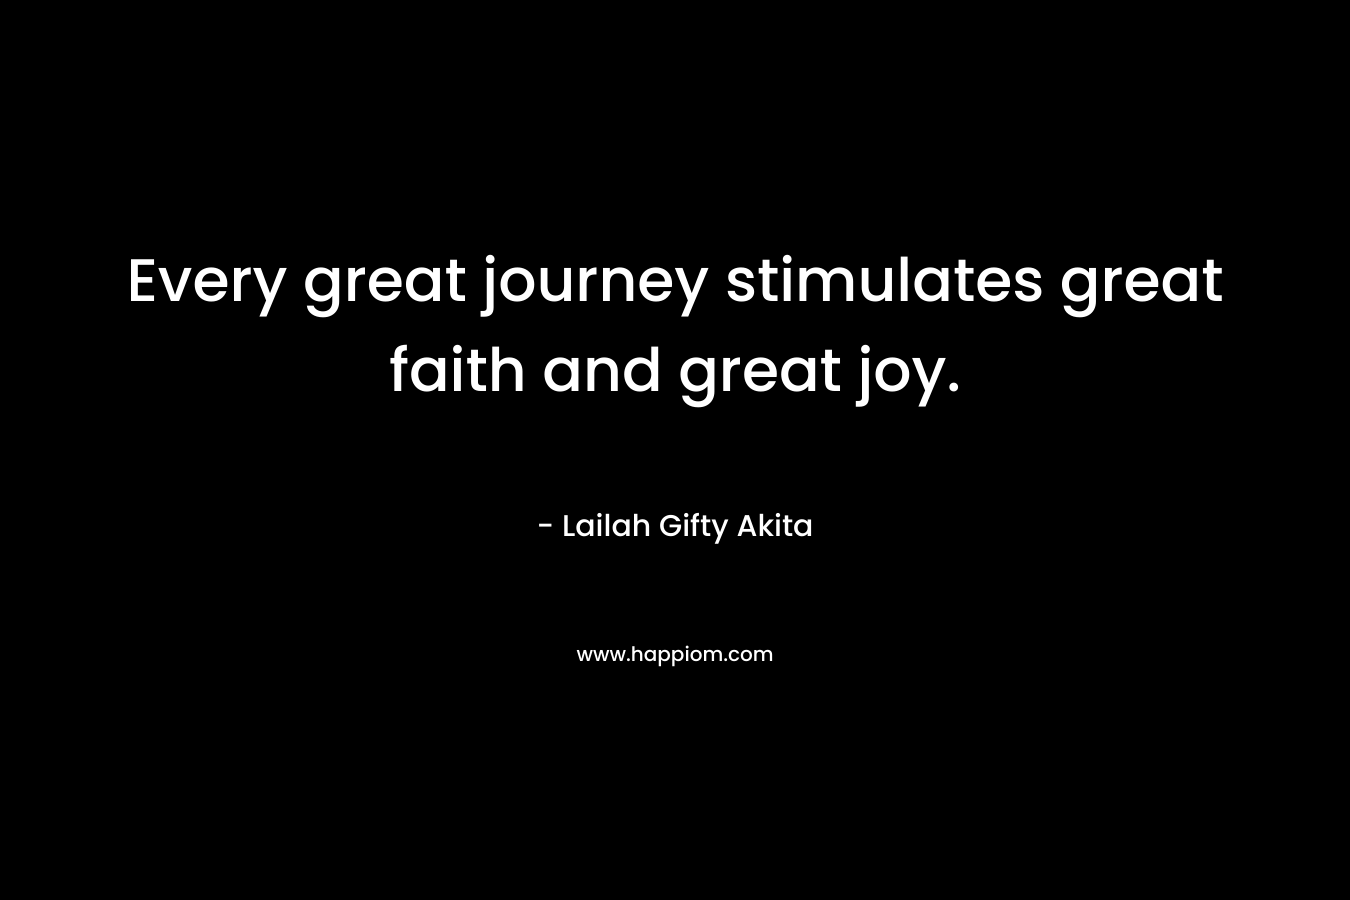 Every great journey stimulates great faith and great joy.